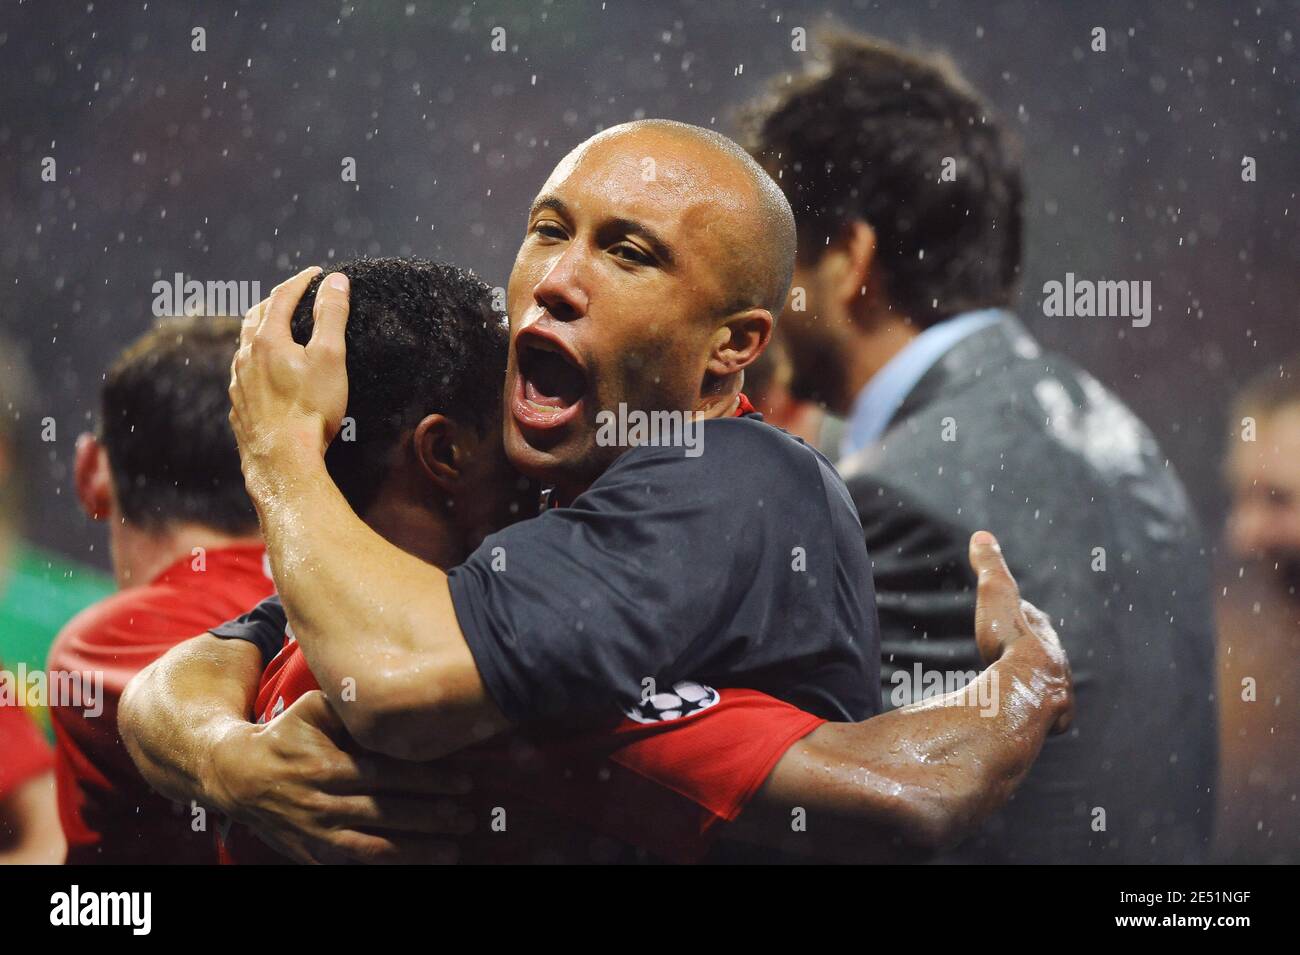 Manchester United's Patrice Evra and Mikael Silvestre celebrates after Chelsea's Nicolas Anelka misses his penaty and offers the victory in Manchester during the UEFA Champions League Final Soccer match, Manchester United vs Chelsea at the Luzhniki Stadium in Moscow, Russia on May 21, 2008. The match ended in a 1-1 draw and Manchester United defeats 6-5, Chelsea in the penalty shootout. Photo by Steeve McMay/Cameleon/ABACAPRESS.COM Stock Photo